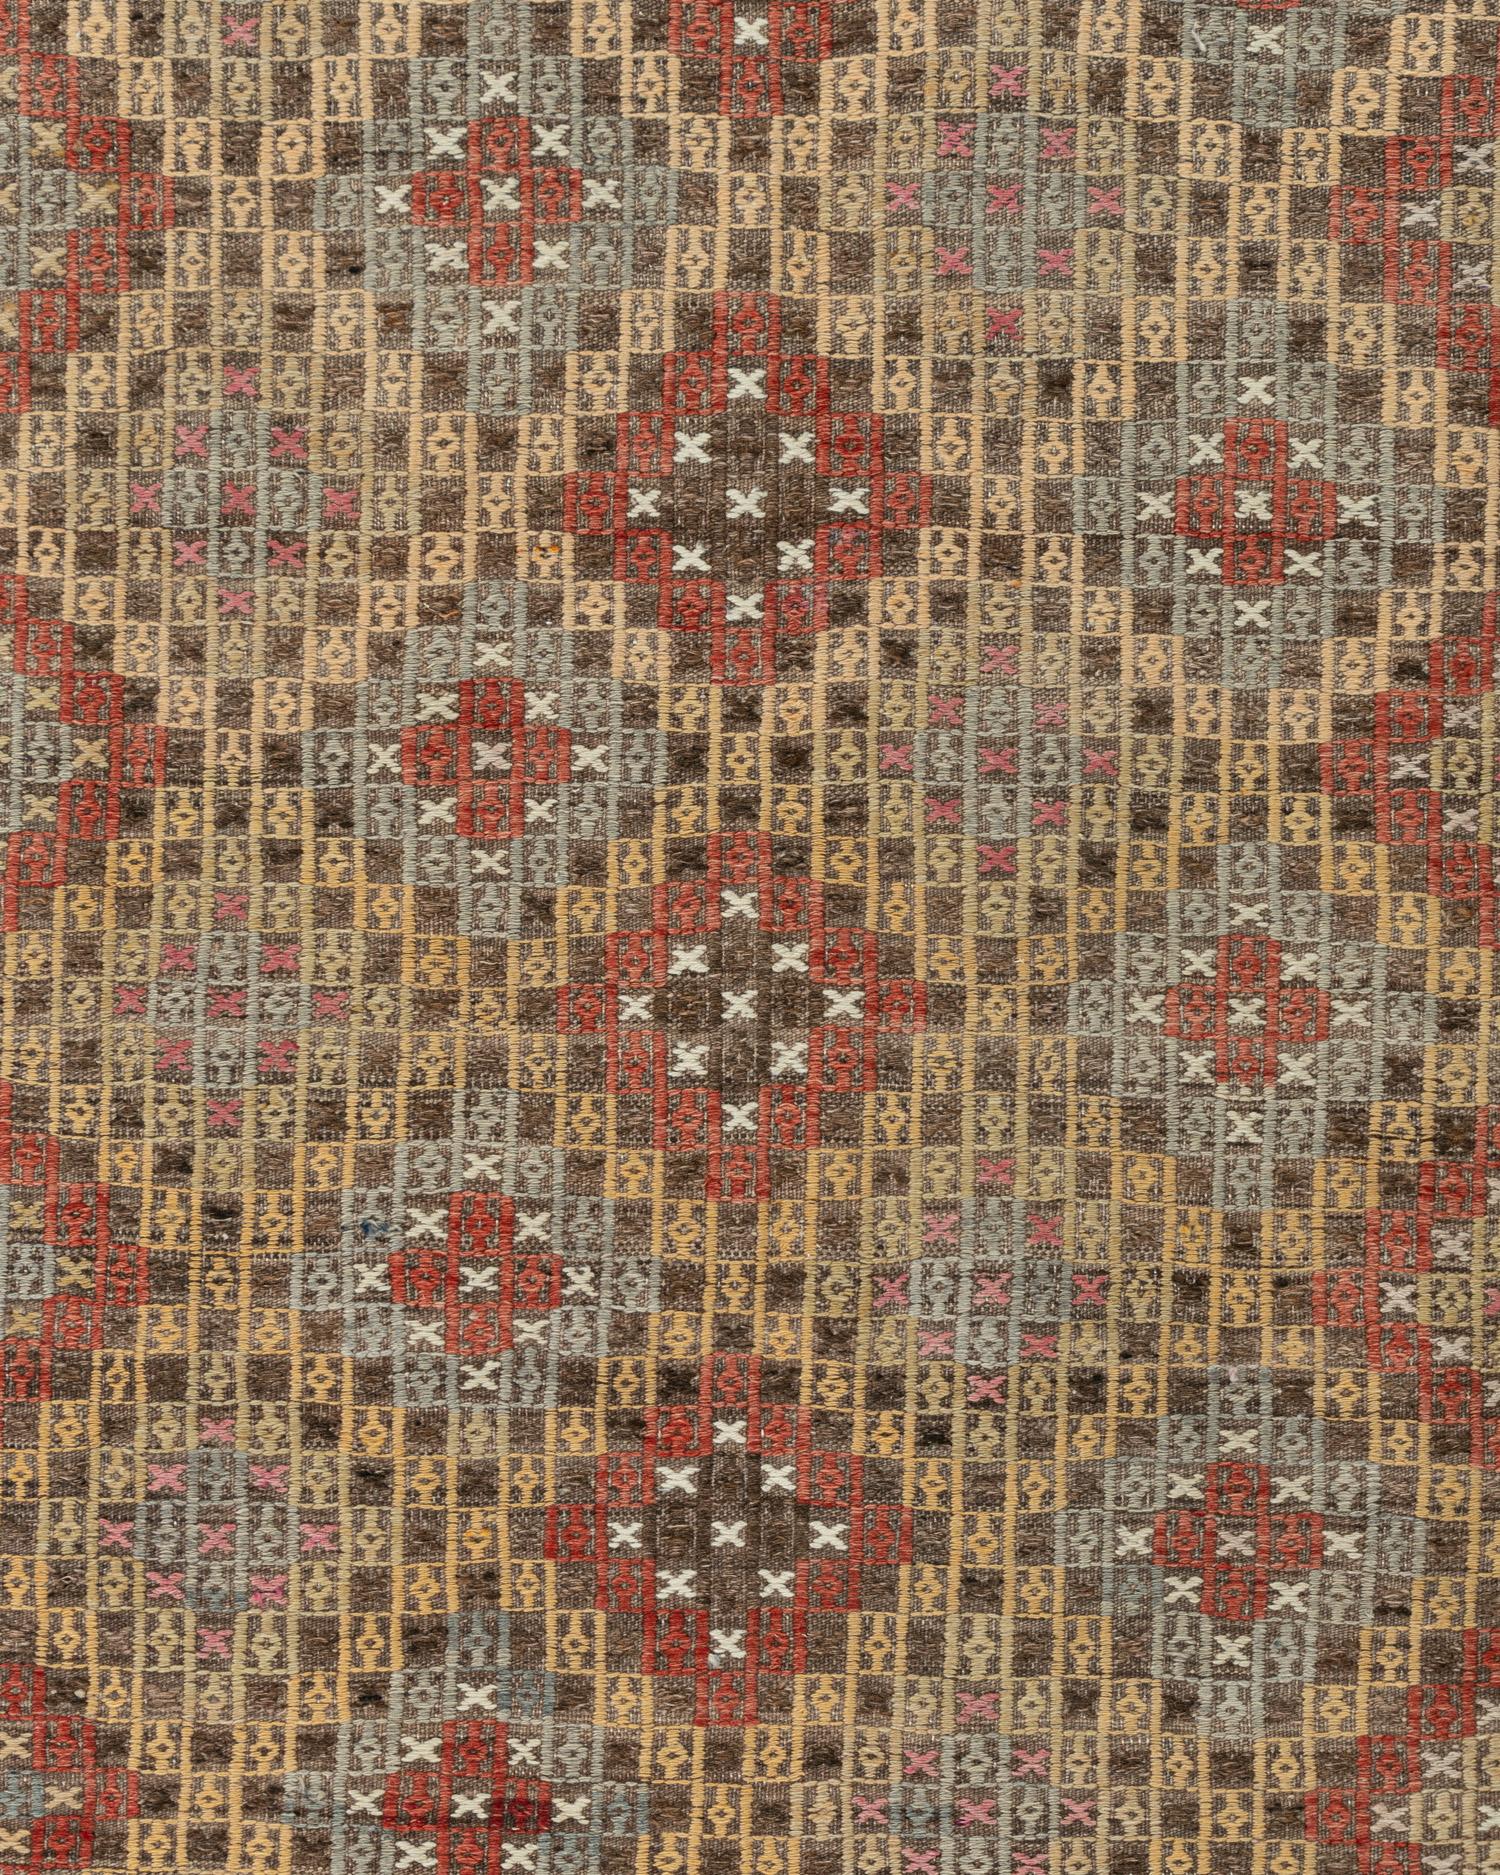 Vintage Turkish Jajim flatweave area rug 5'2 X 9'7. The Jajim (cecim) technique is followed in Turkey, Persia and the Caucasus and consists of a plain weave (equal warps and wefts) ground with an added (supplementary) weft pattern. The wefts are